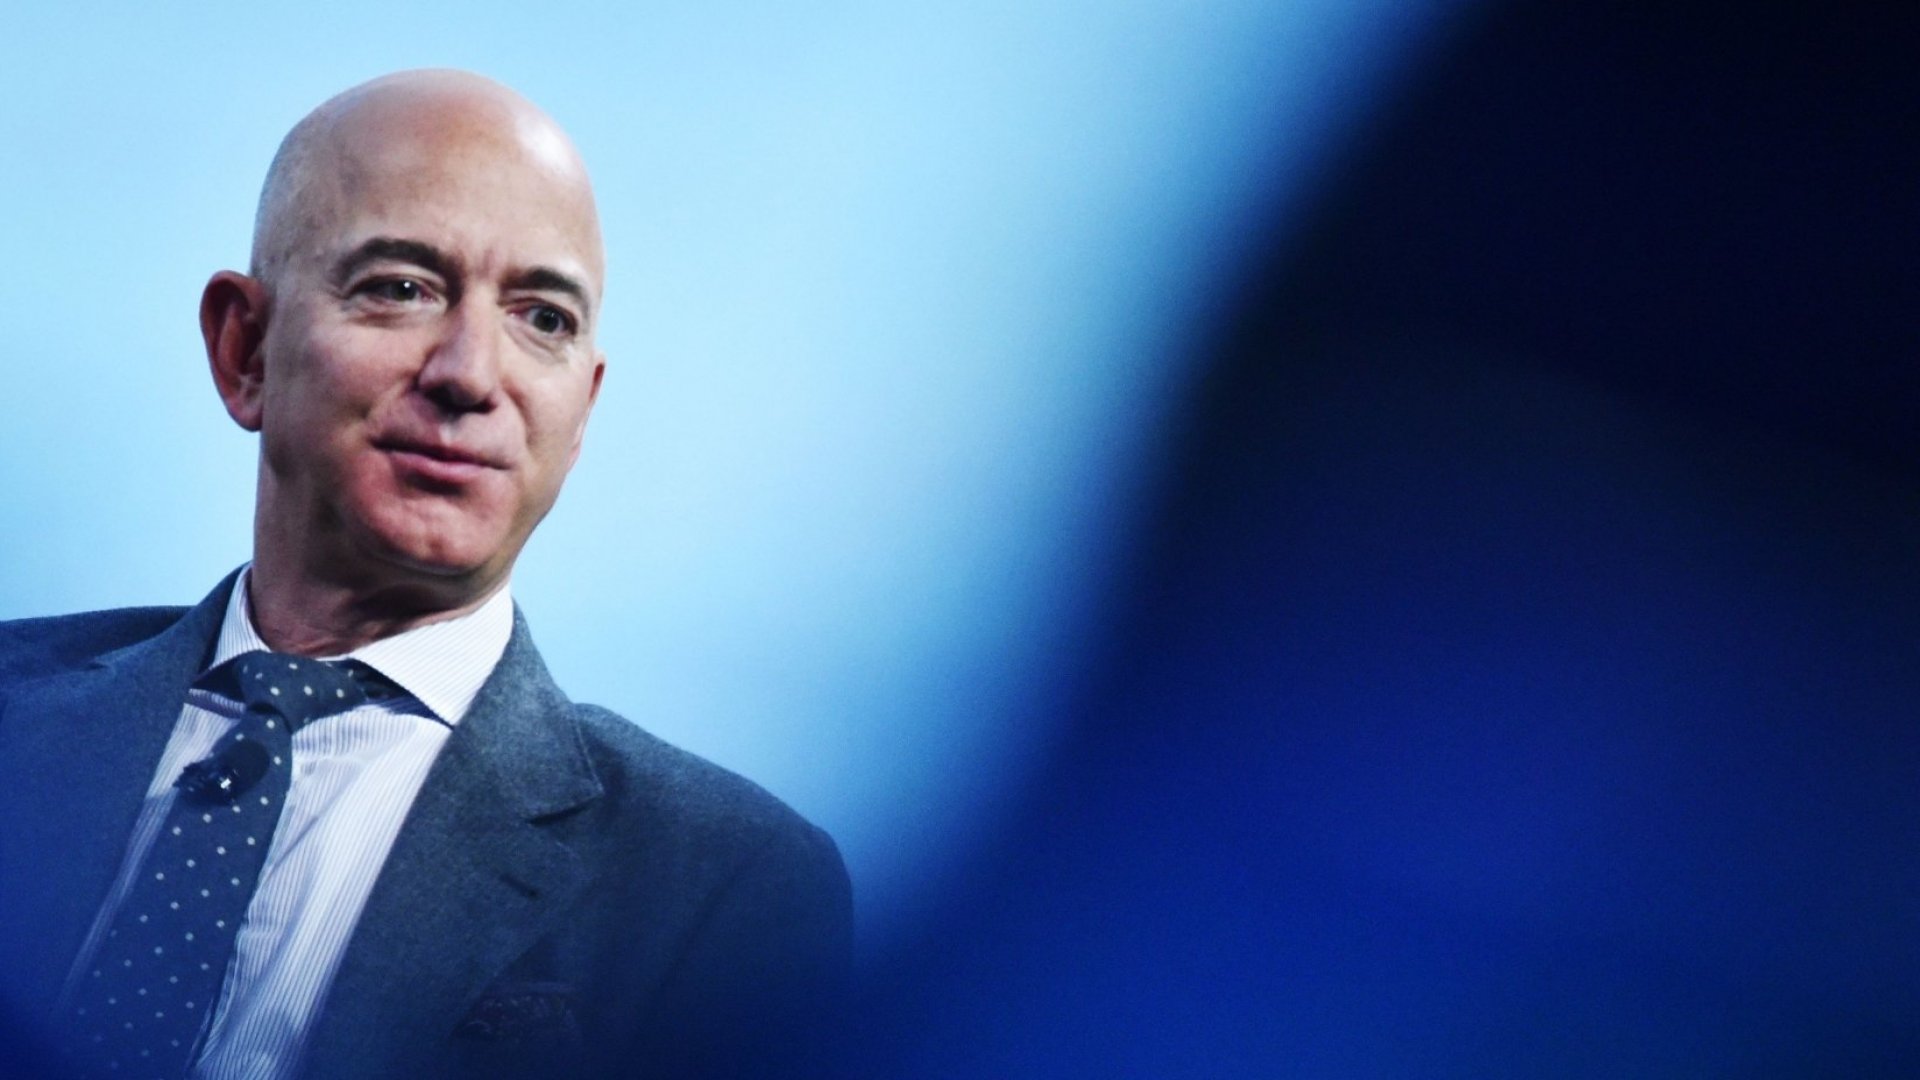 Jeff bezos on planning for the future in uncertain times